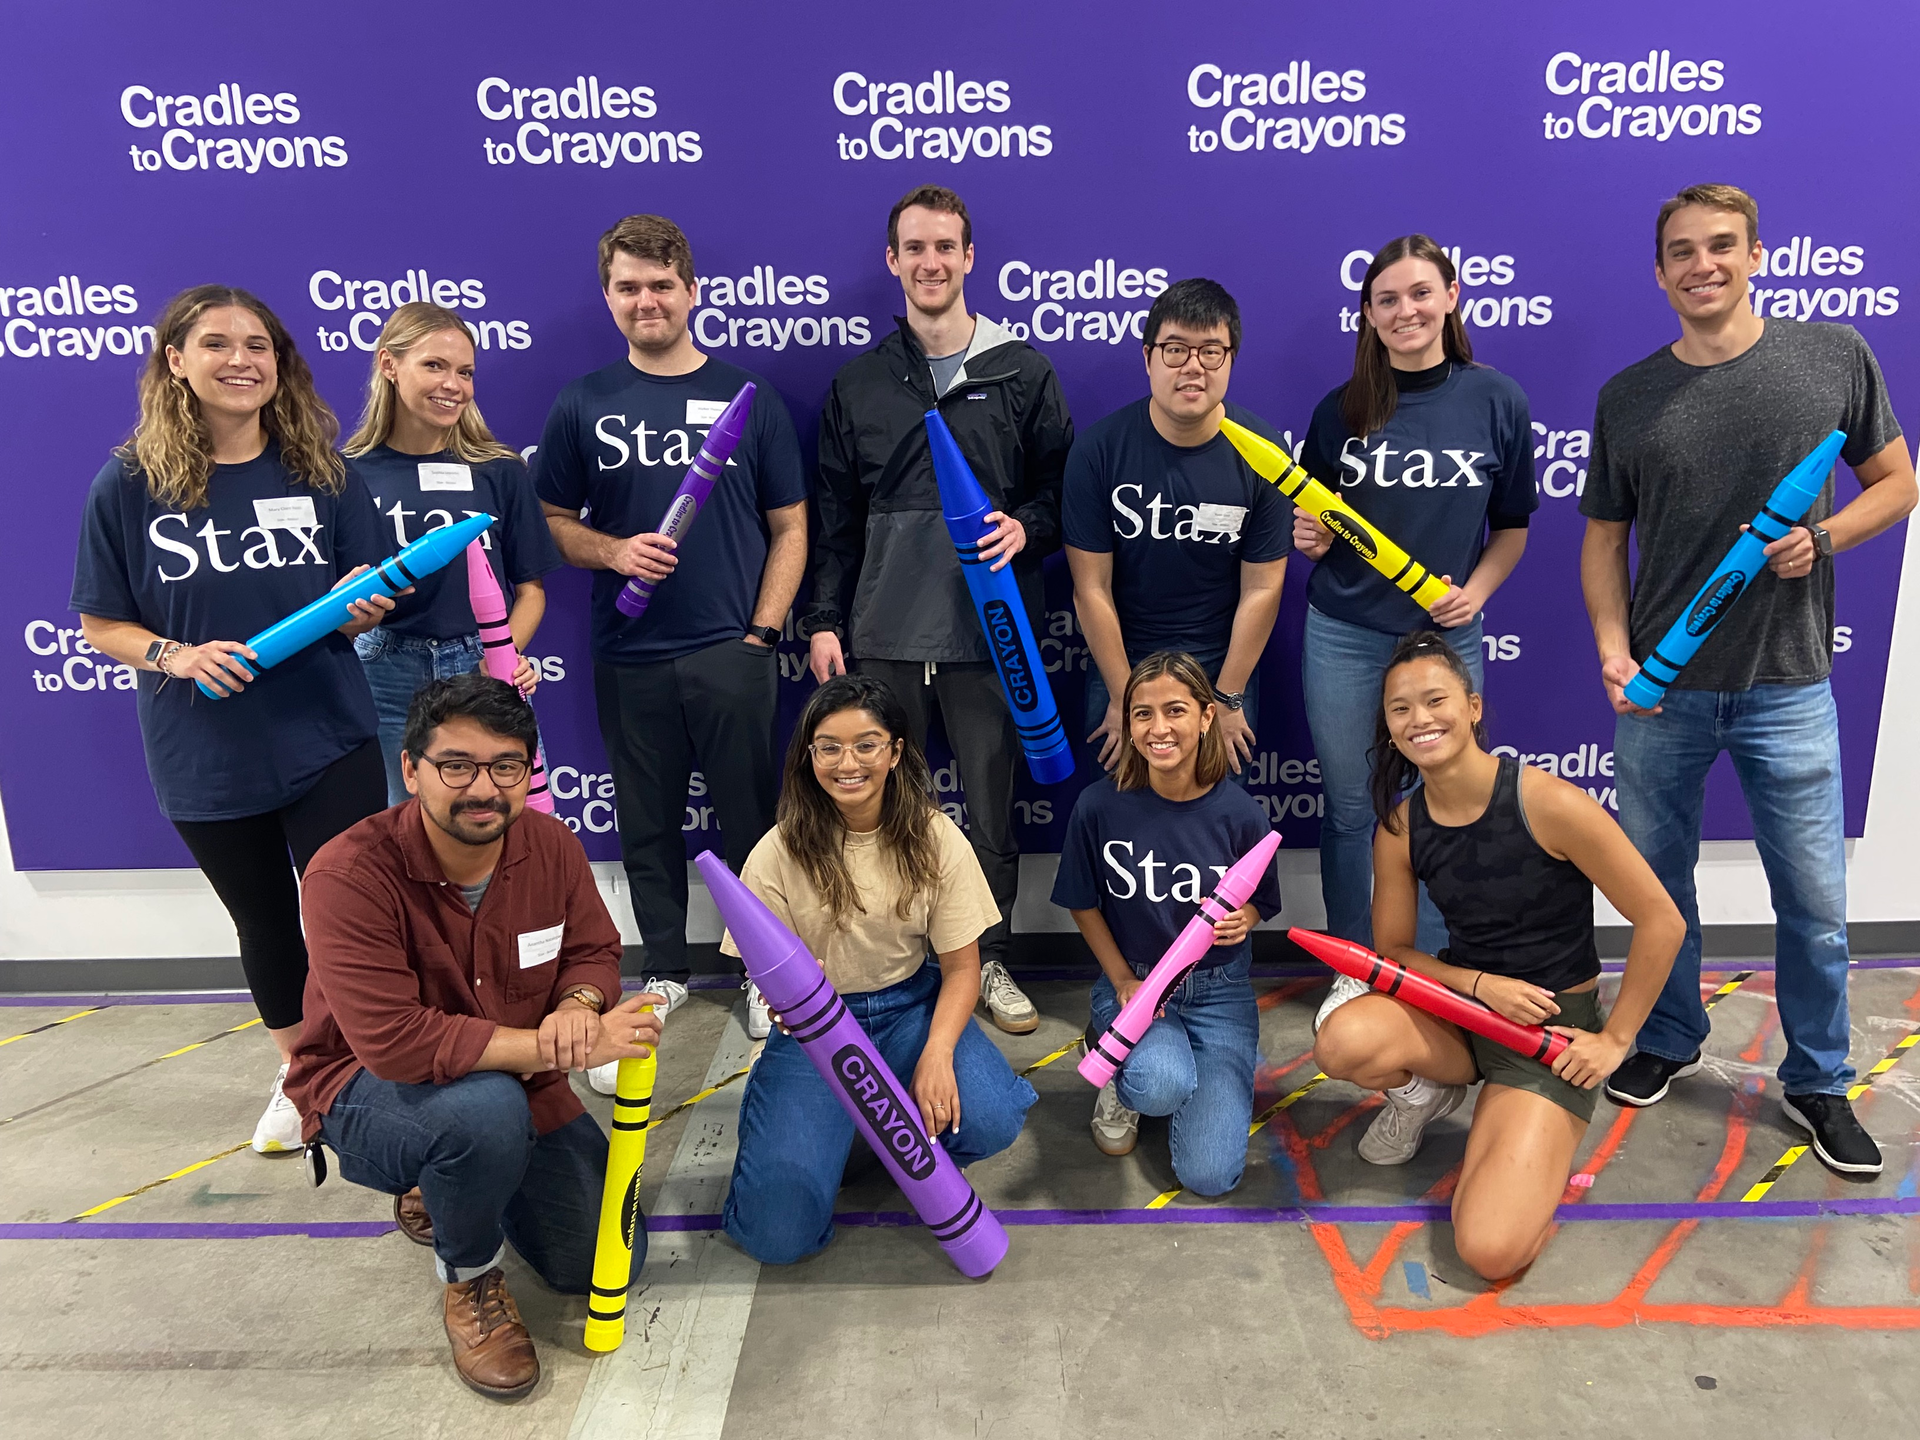 Stax Boston's office at the volunteering event for Cradles to Crayons